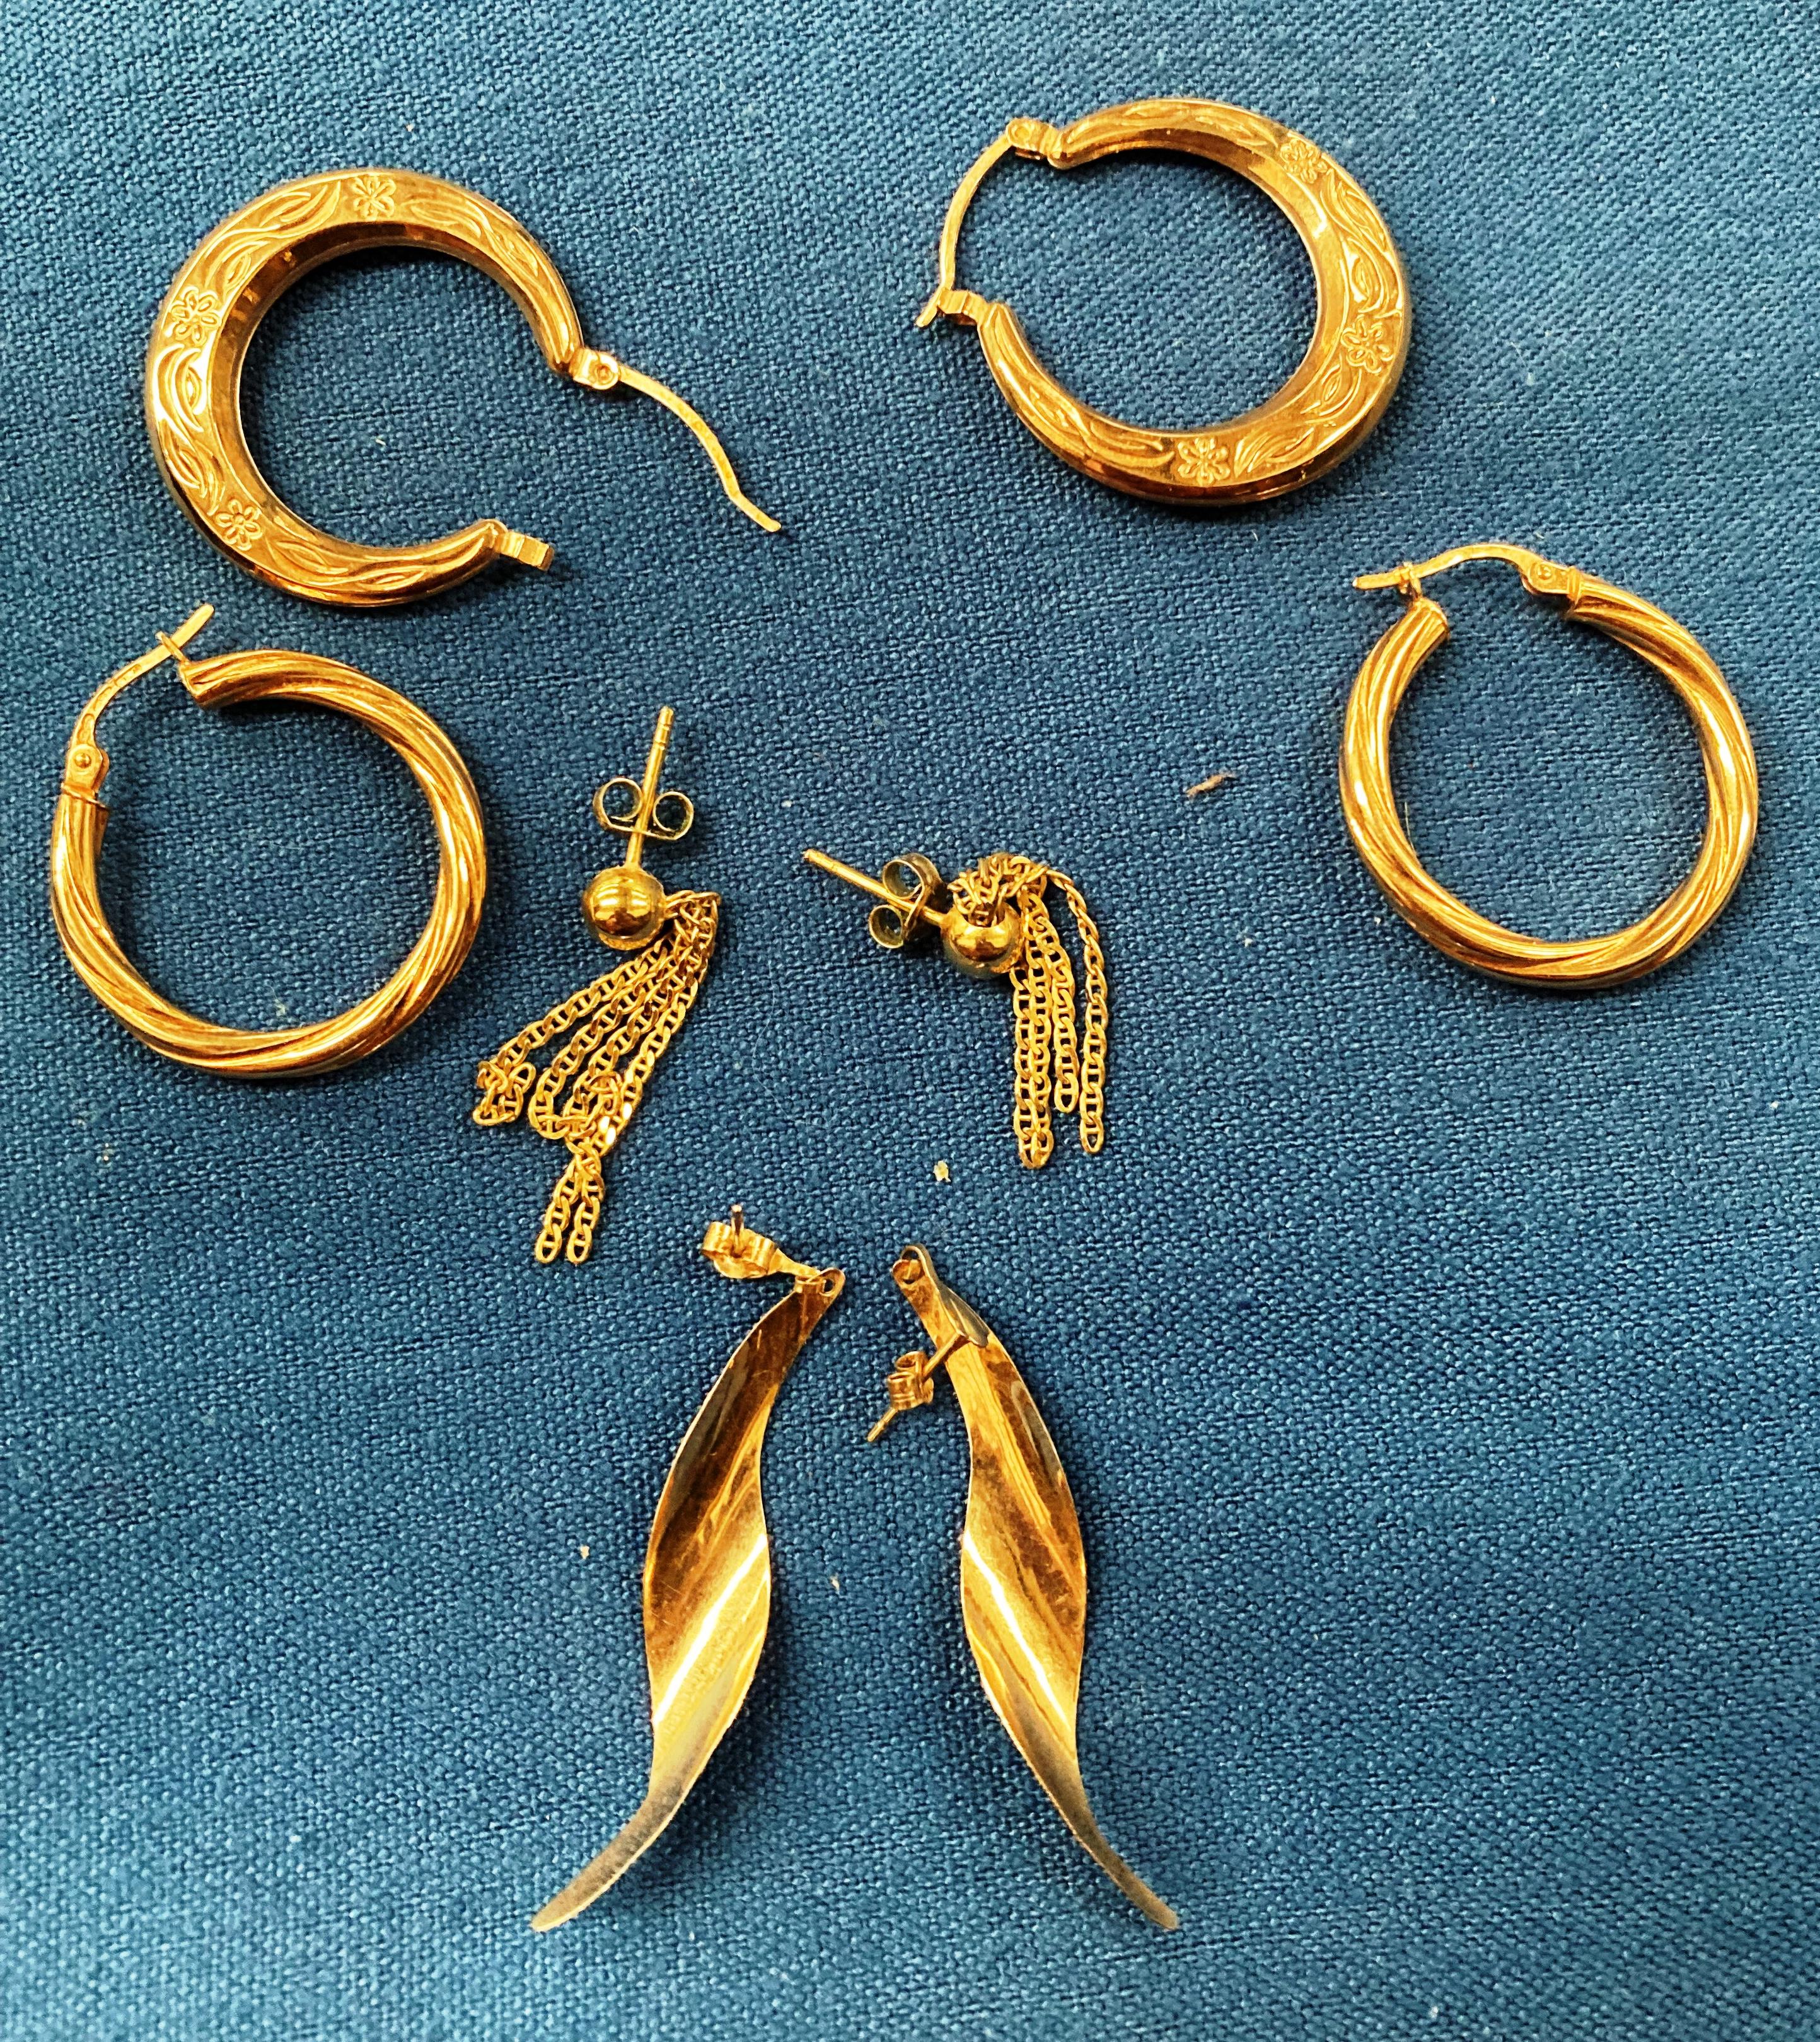 Four pairs of 9ct gold earrings. Weight - 6.